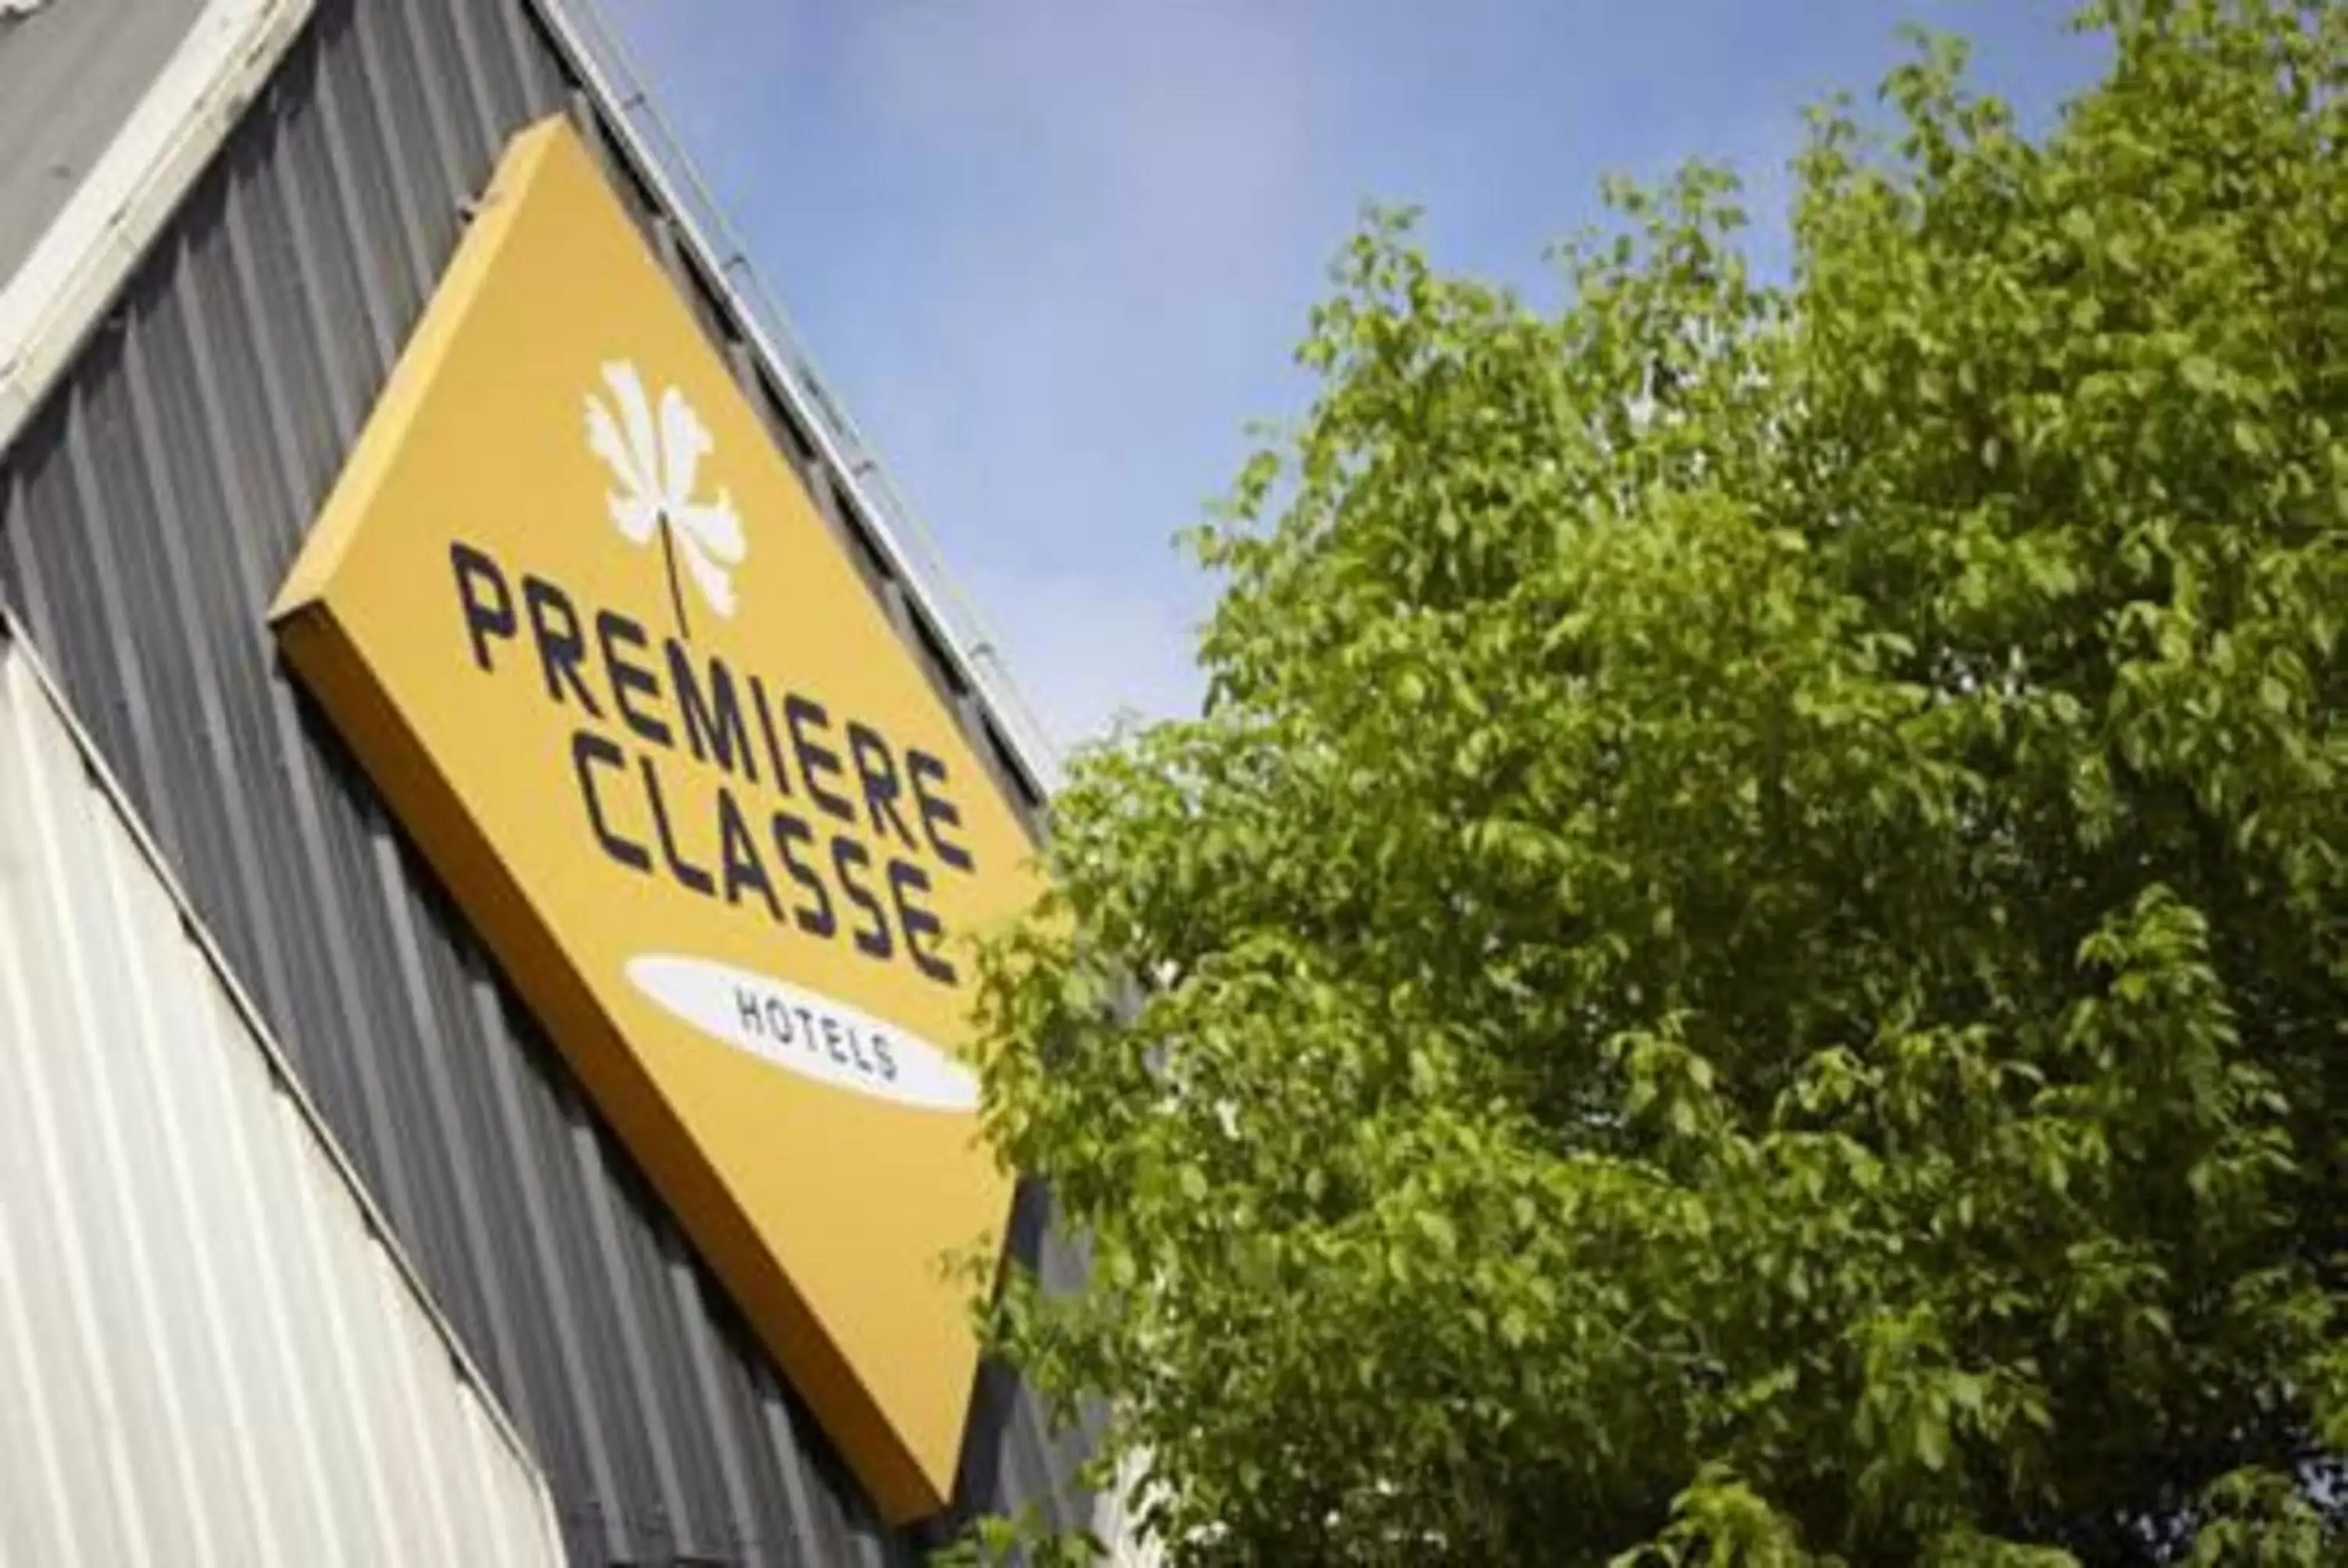 Property logo or sign in Premiere Classe Metz Sud Jouy Aux Arches